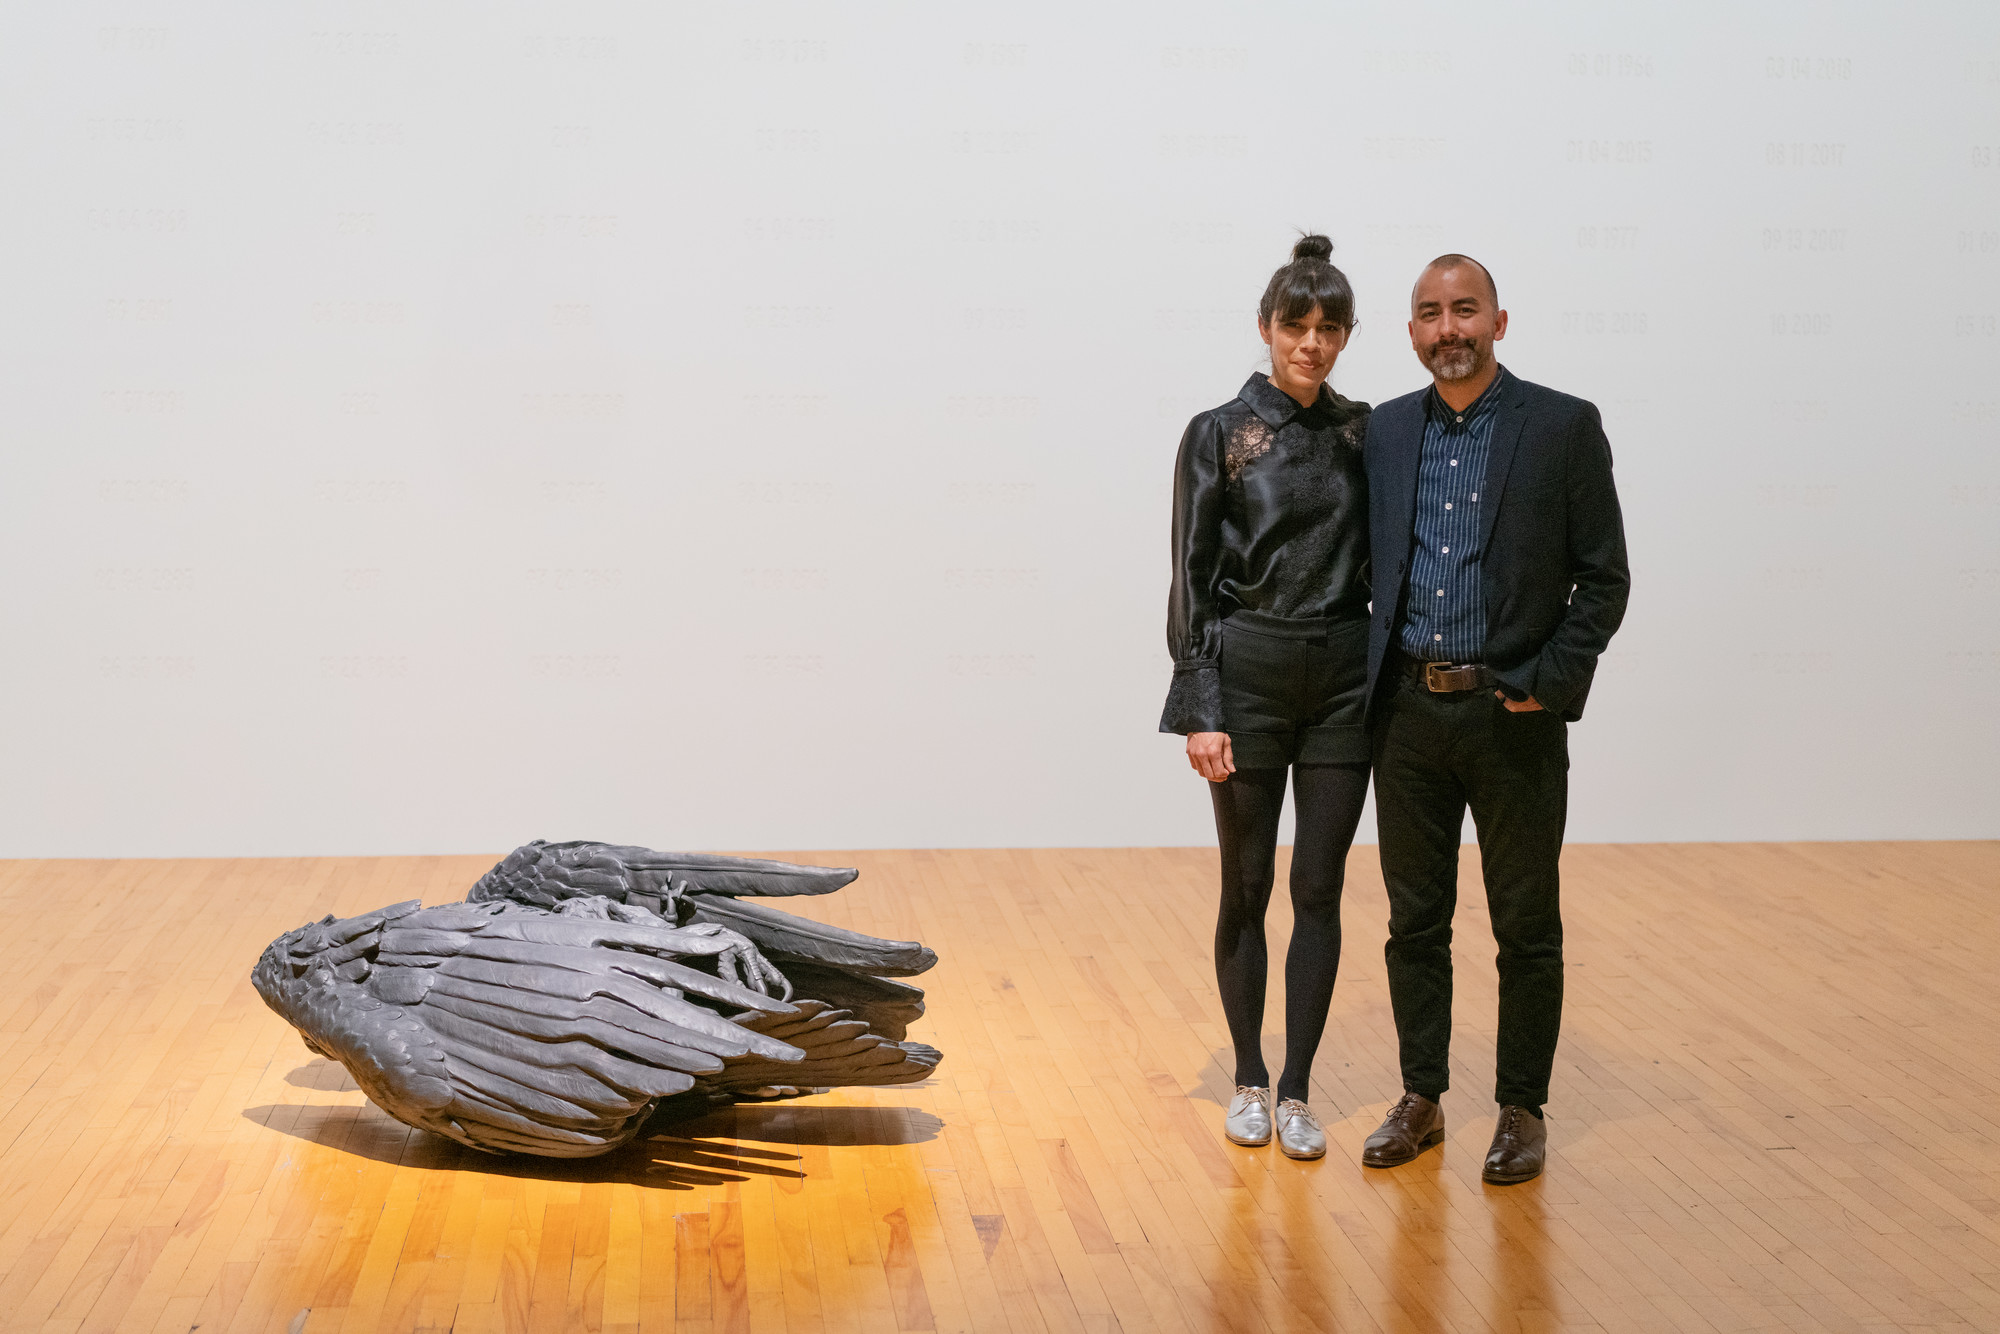 Photograph of Adriana Corral and Vincent Valdez next to their work 'Requiem' in the exhibition 'Suffering From Realness' at MASS MoCA.